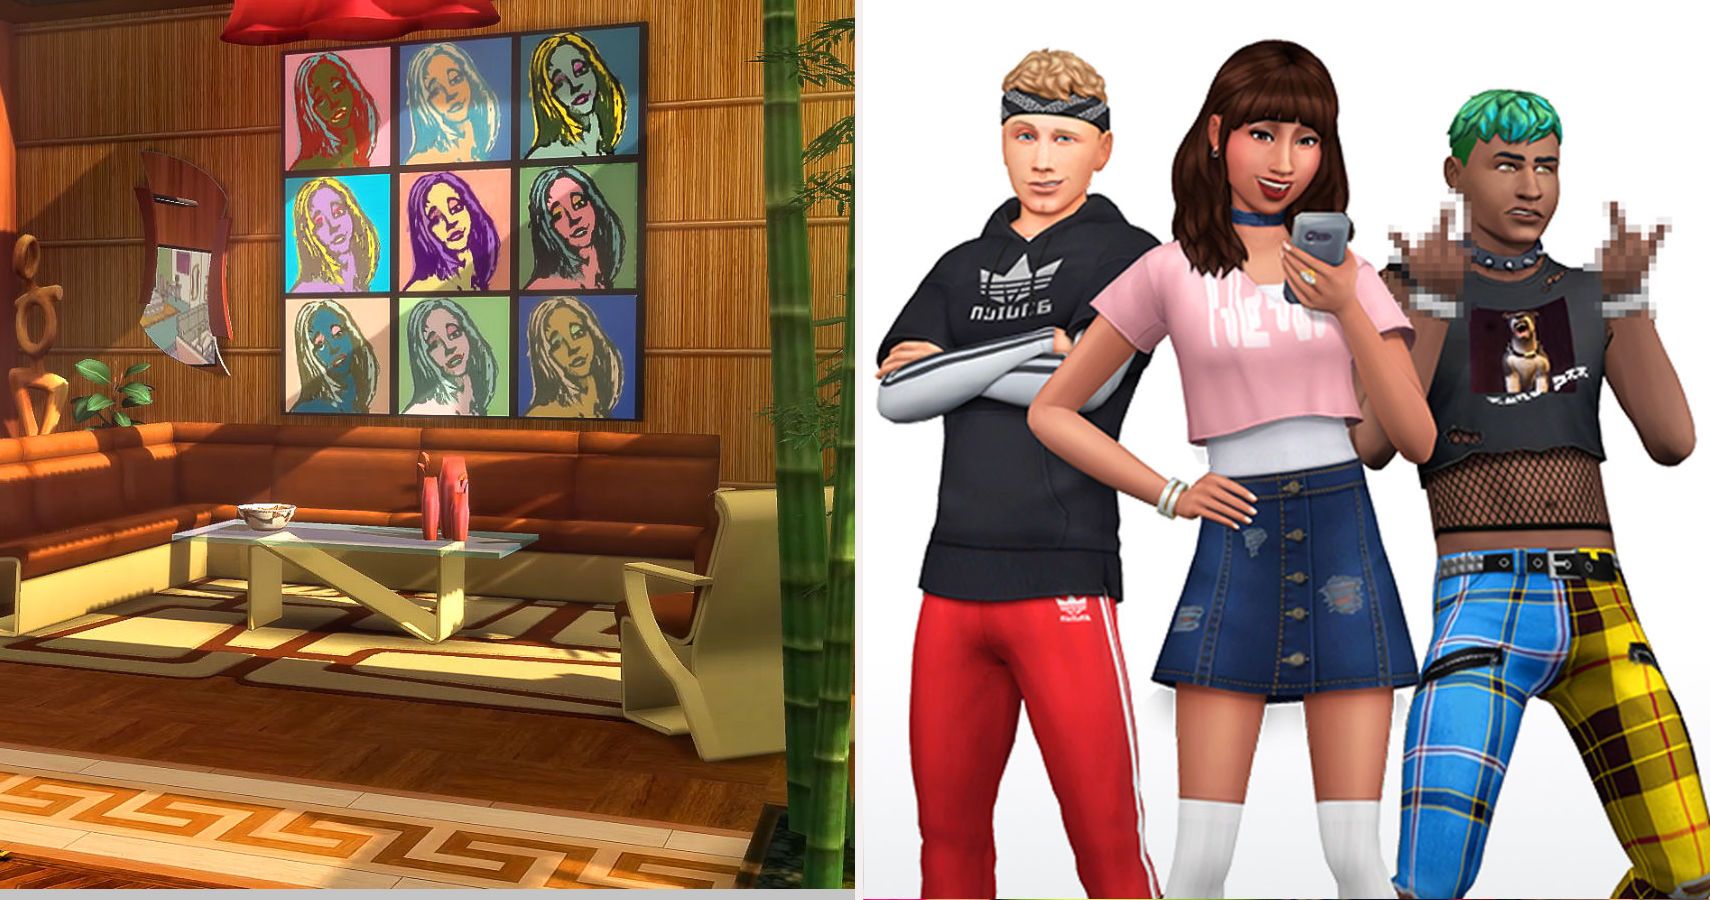 the sims 4 maxis match cc mod folder download